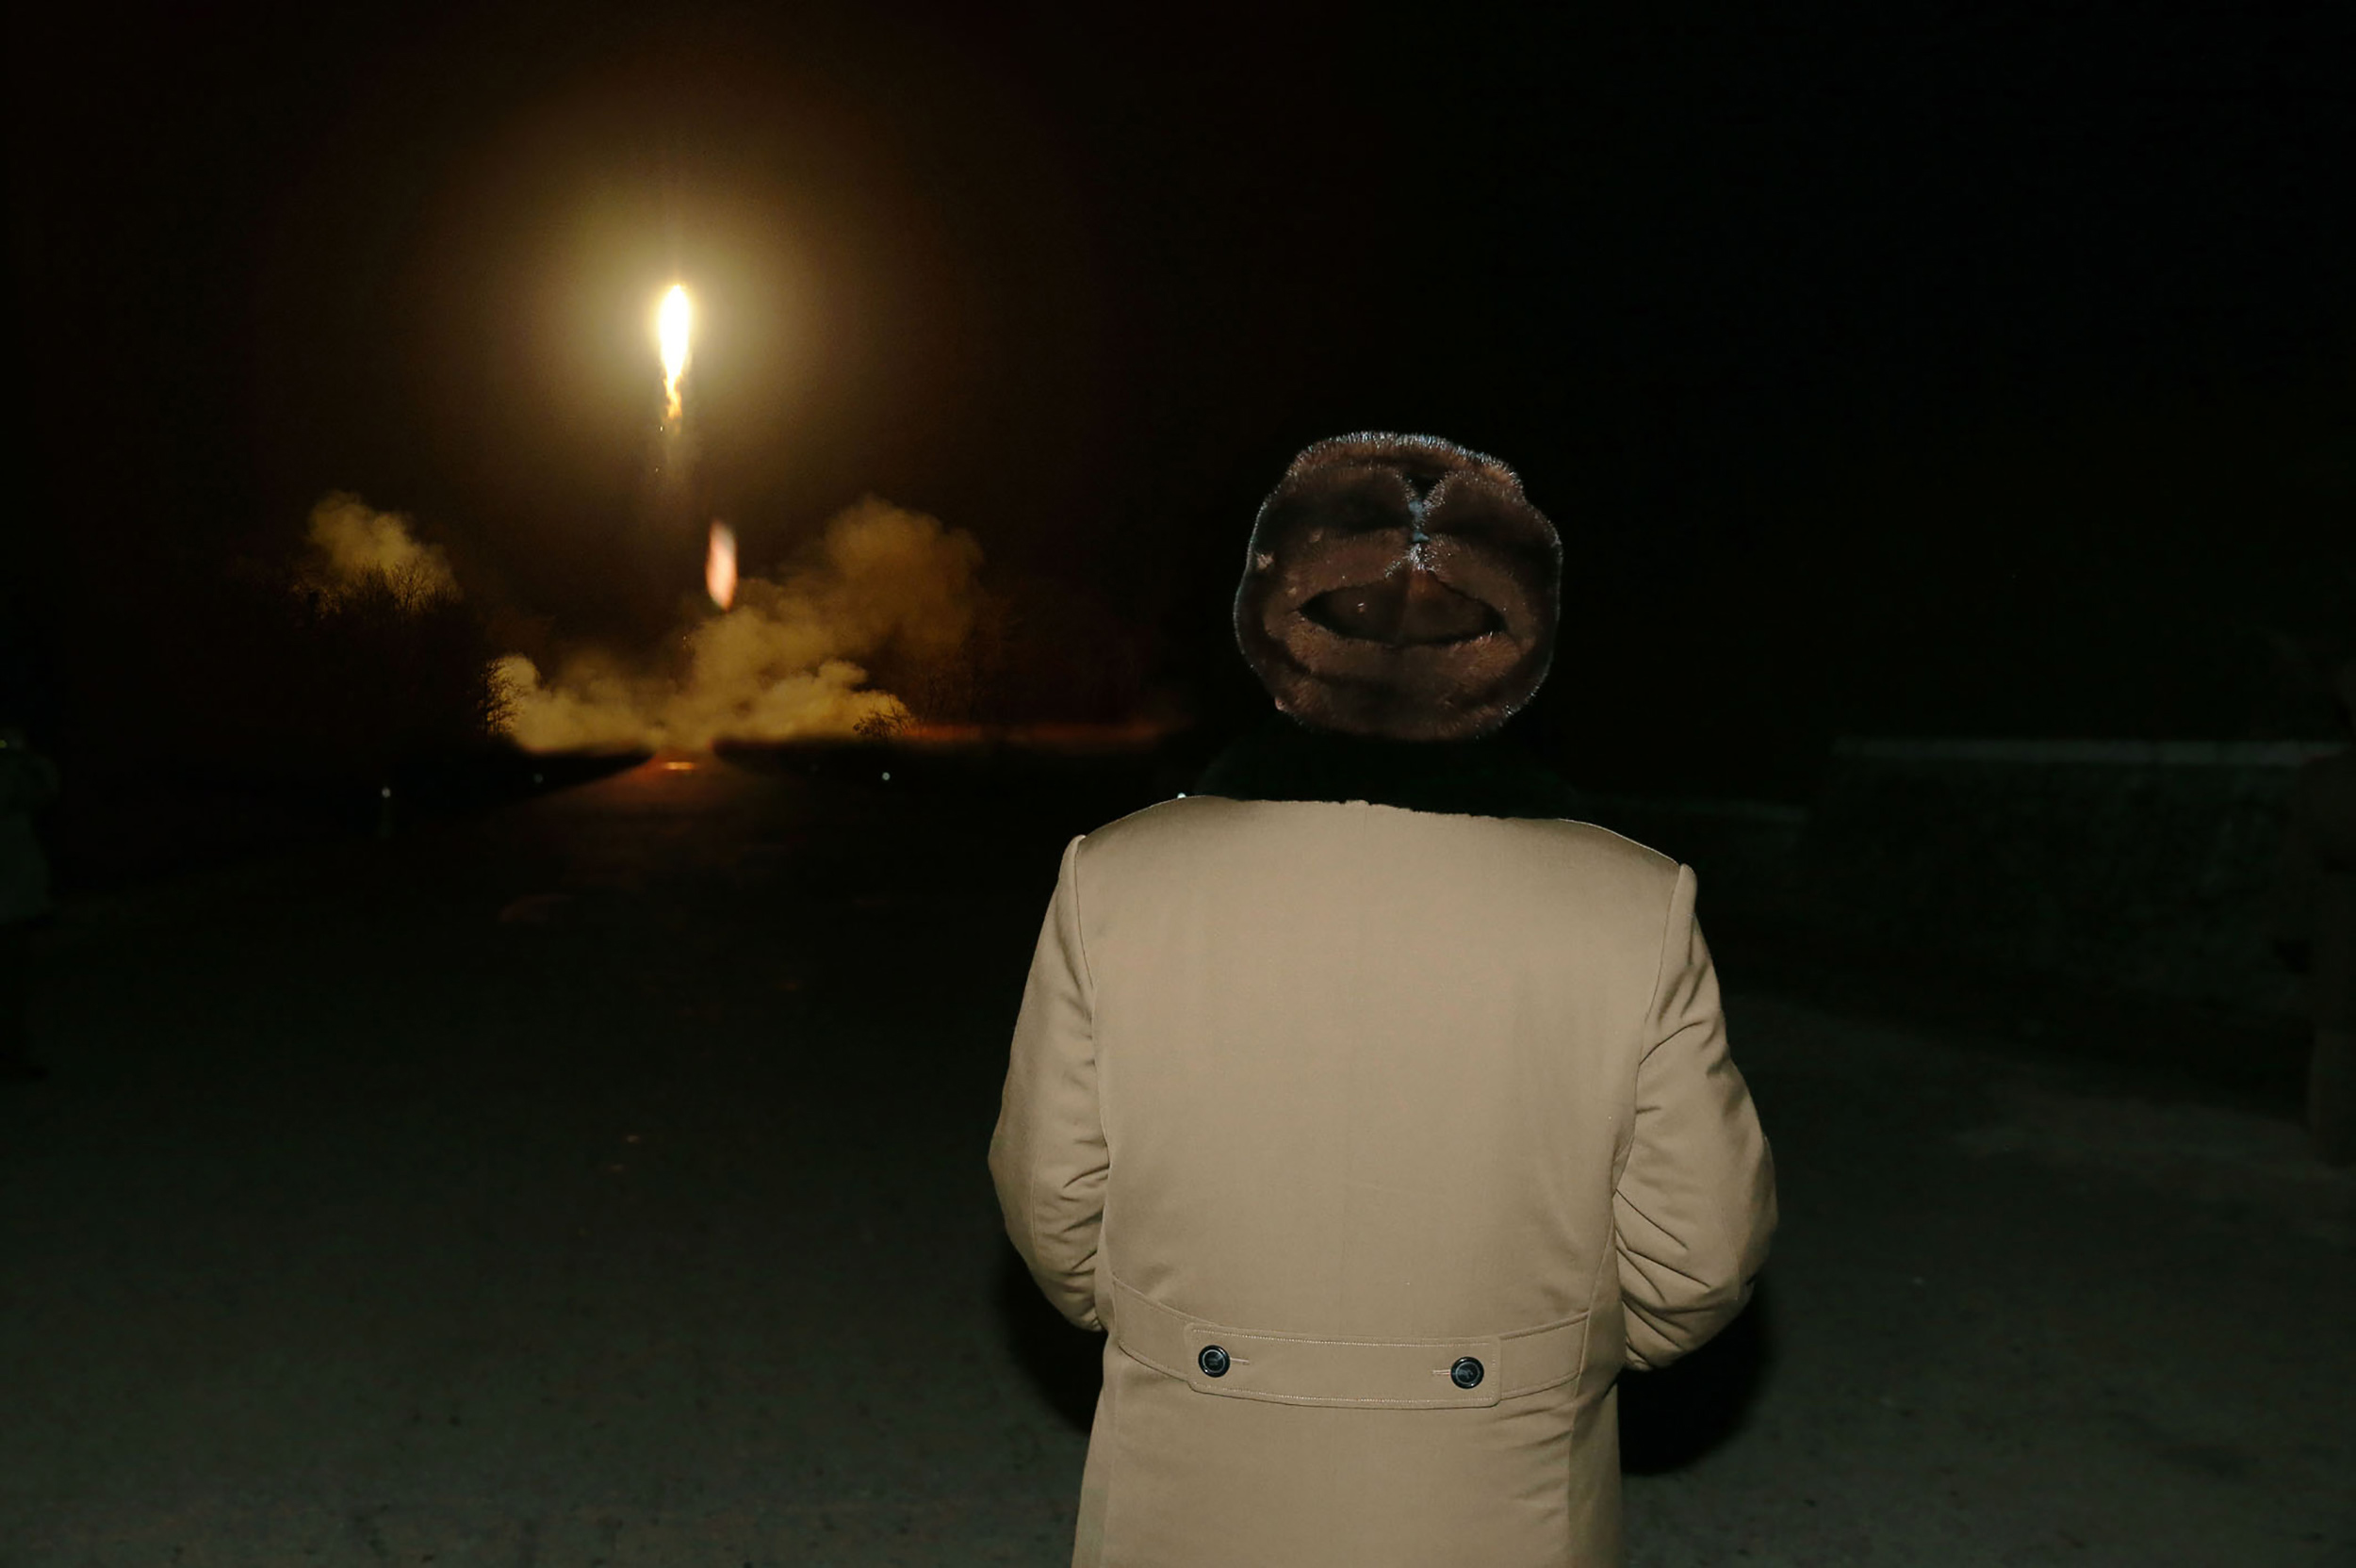 This undated picture released from North Korea's official Korean Central News Agency (KCNA) on March 11, 2016 shows North Korean leader Kim Jong-Un attending a mobile drill for ballistic rocket launch at an undisclosed location. North Korean leader Kim Jong-Un has ordered further nuclear tests, state media said on March 11, as military tensions surge on the Korean peninsula with South Korean and US forces engaged in large-scale joint exercises condemned by Pyongyang. / AFP PHOTO / KCNA / KNS